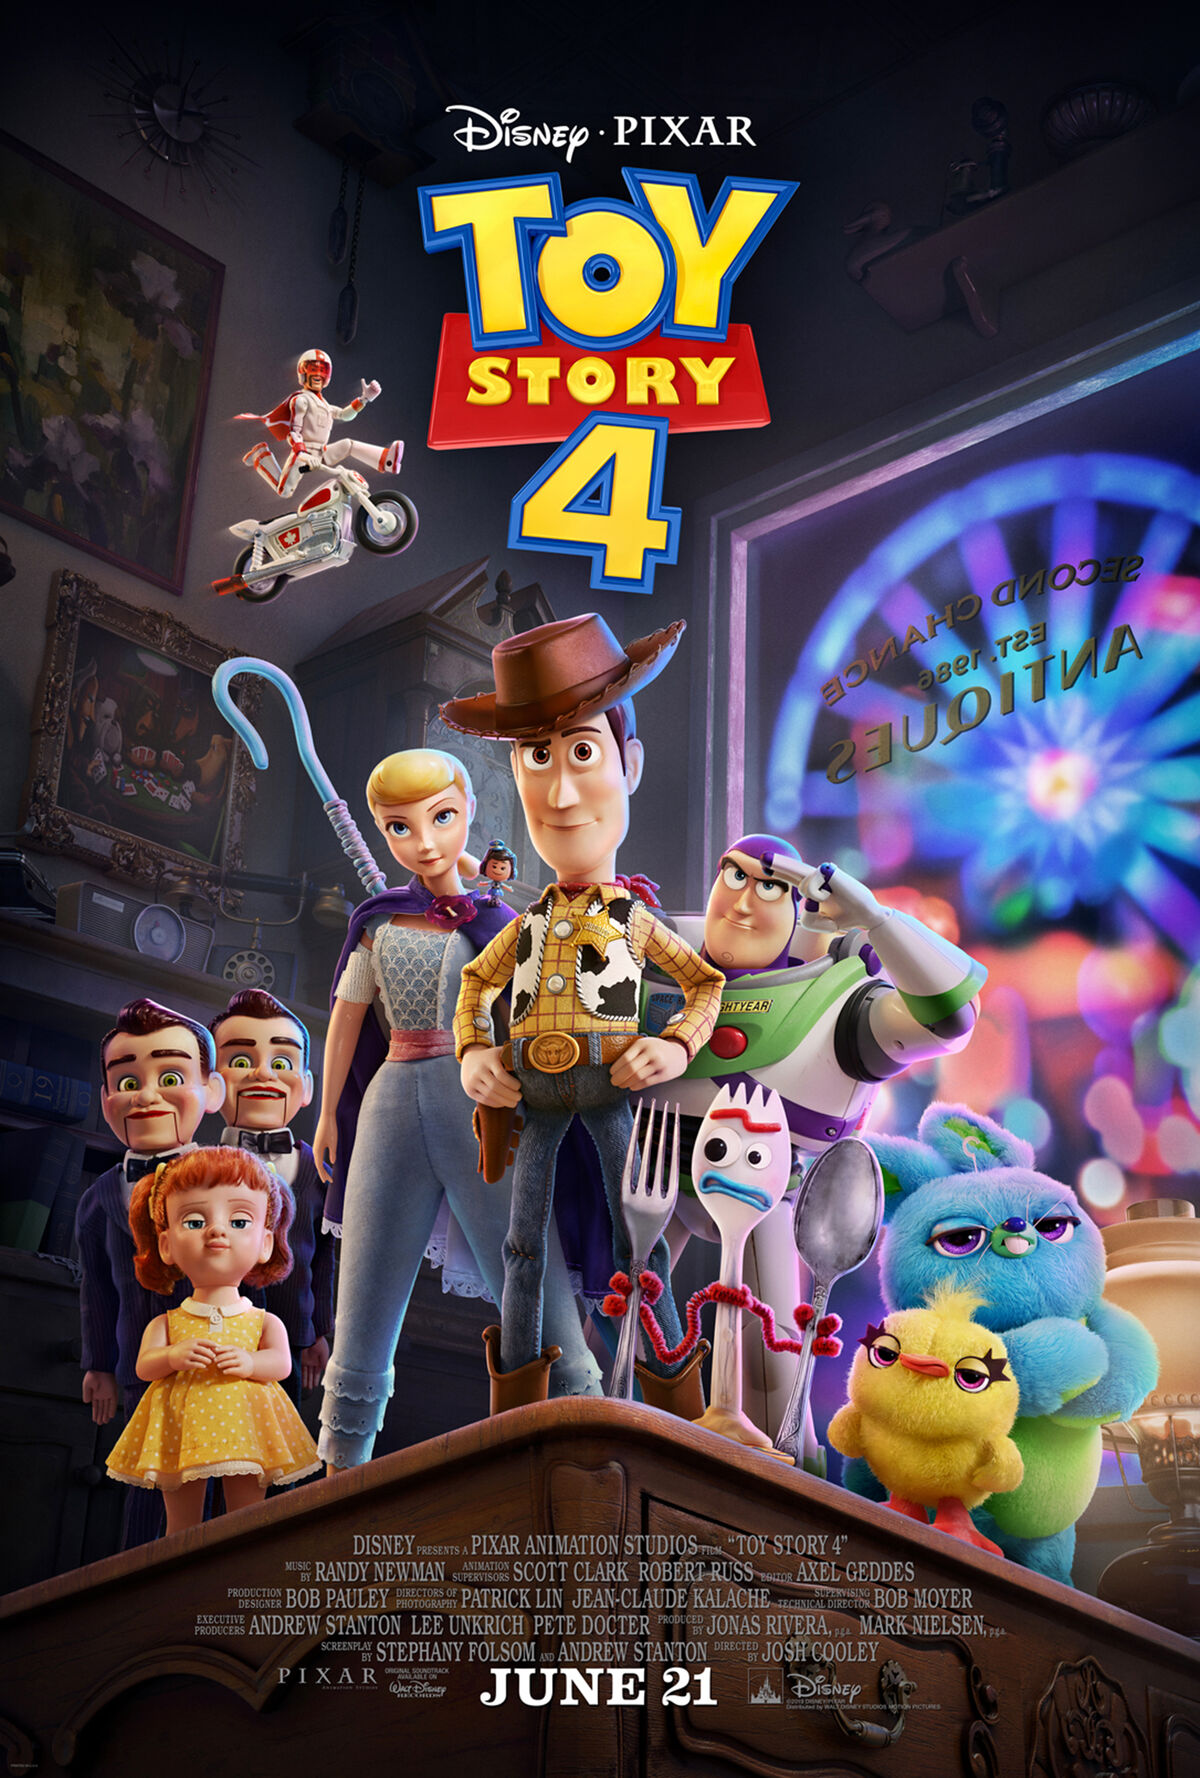 https://static.wikia.nocookie.net/pixar/images/1/18/Toy_Story_final_poster.jpeg/revision/latest/scale-to-width-down/1200?cb=20230507013408